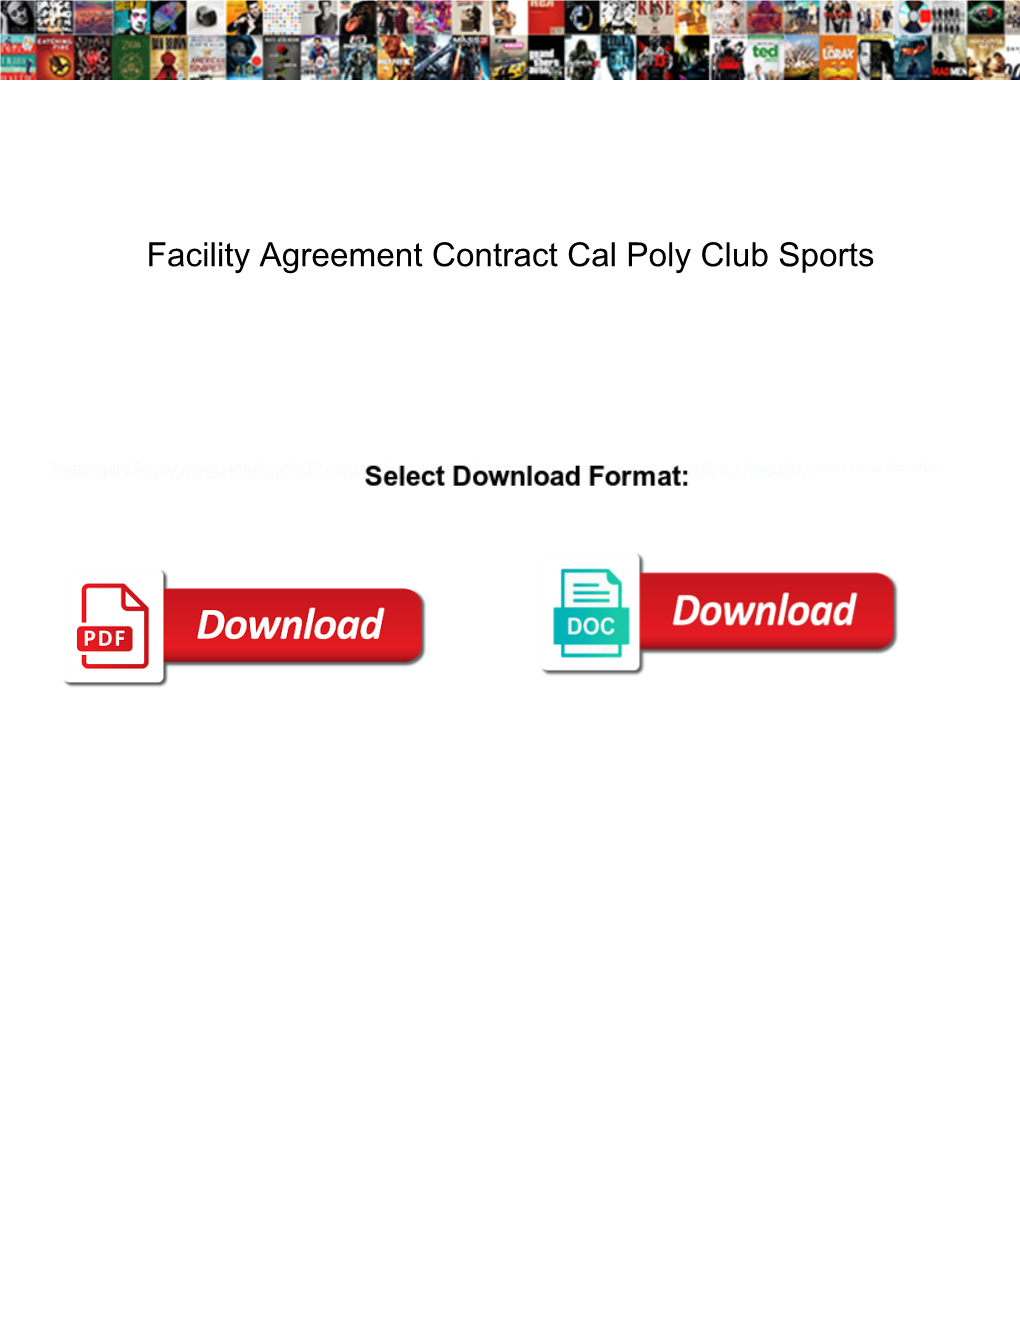 Facility Agreement Contract Cal Poly Club Sports